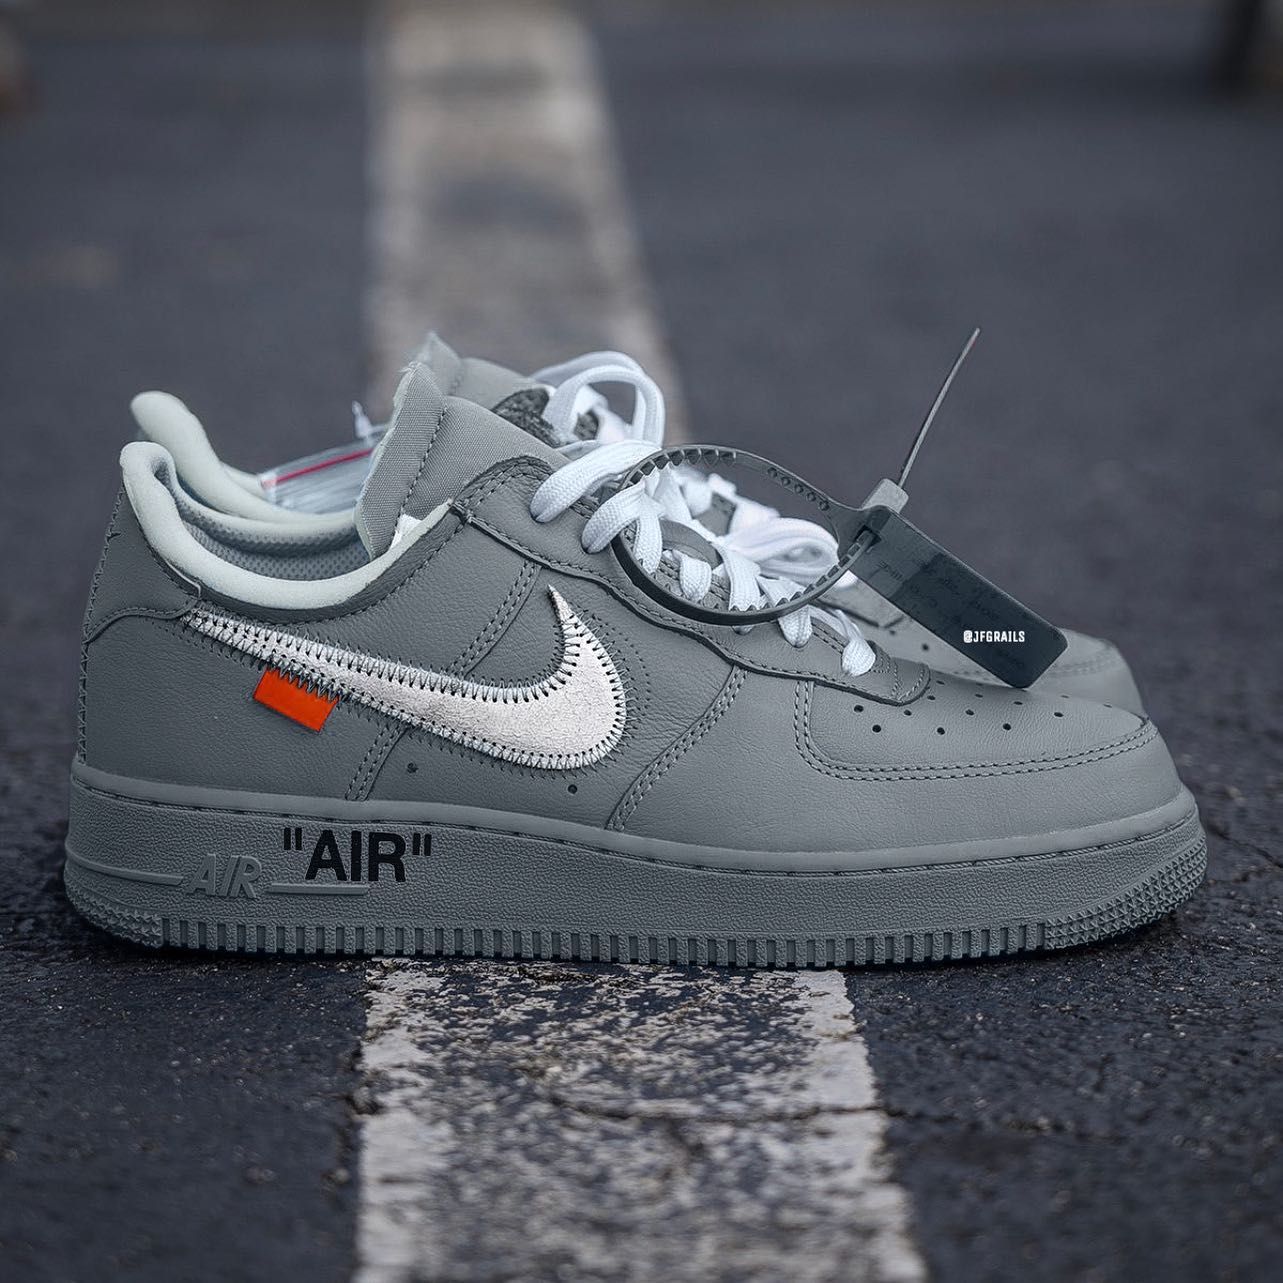 OFF-WHITE x Nike Air 1 Low “Ghost Grey” Releasing | of Heat°